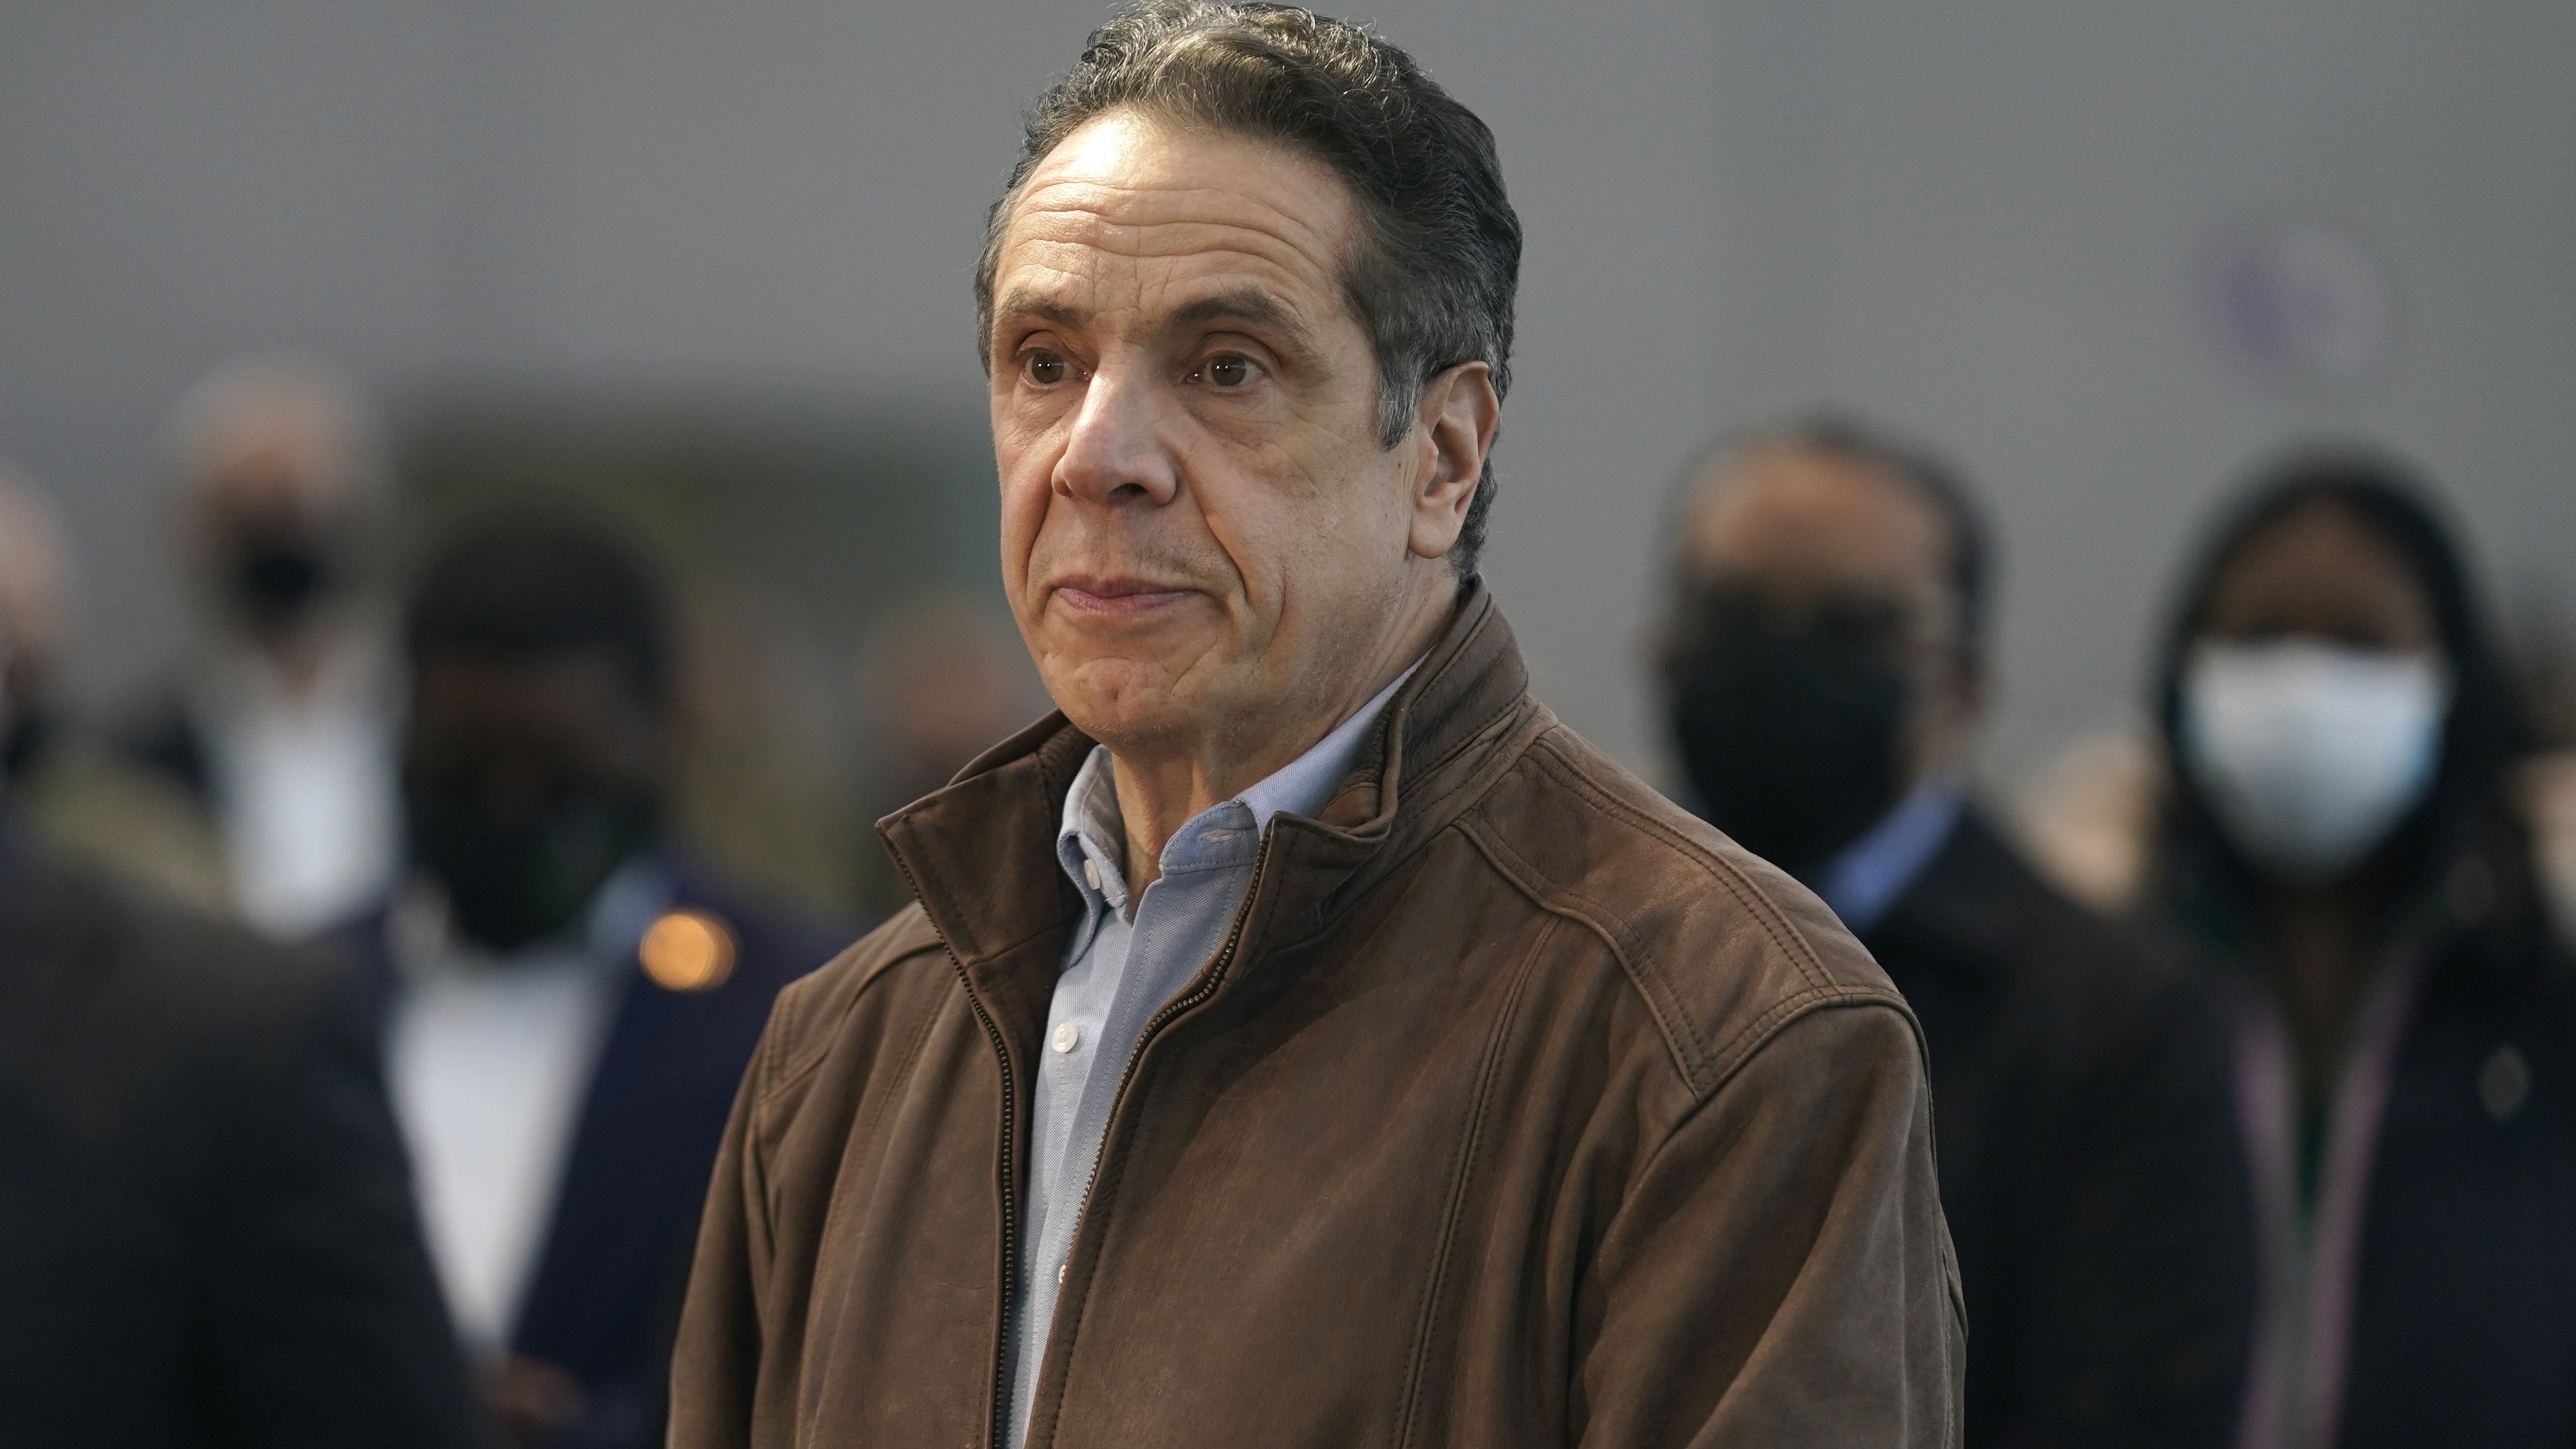 New York Gov. Andrew Cuomo is the subject of new misconduct allegations, after a female aide accused him of groping her. Cuomo is seen here earlier this week, speaking at a vaccination site in New York City. Seth Wenig/Pool / Getty Images